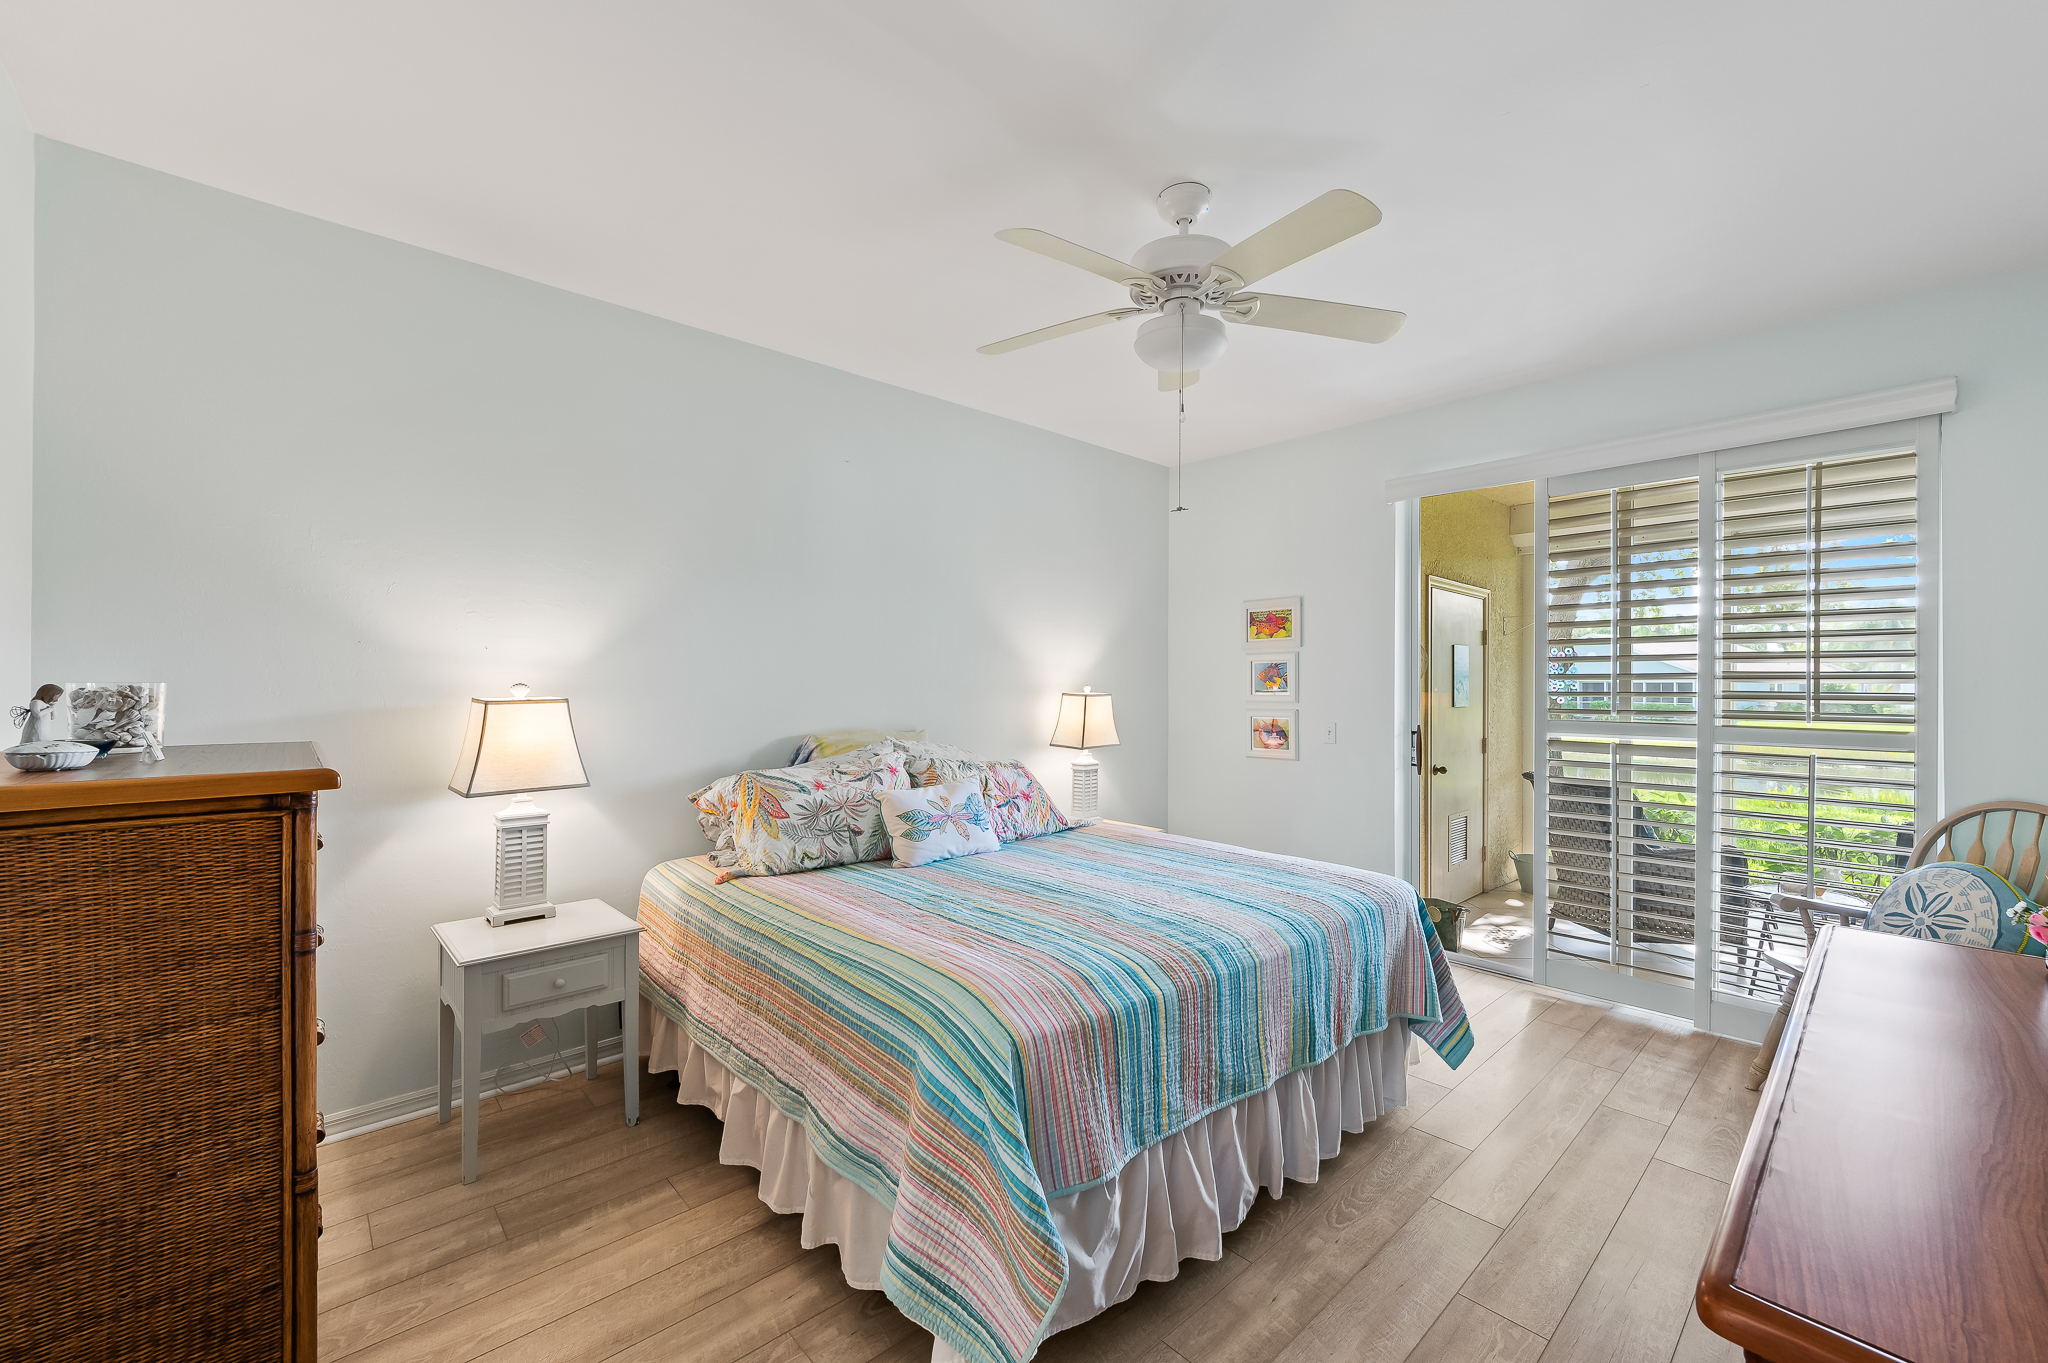 Primary Bedroom with huge walk-in closet and access to lanai. Beautiful water view beyond the sliding plantation shutter panels.